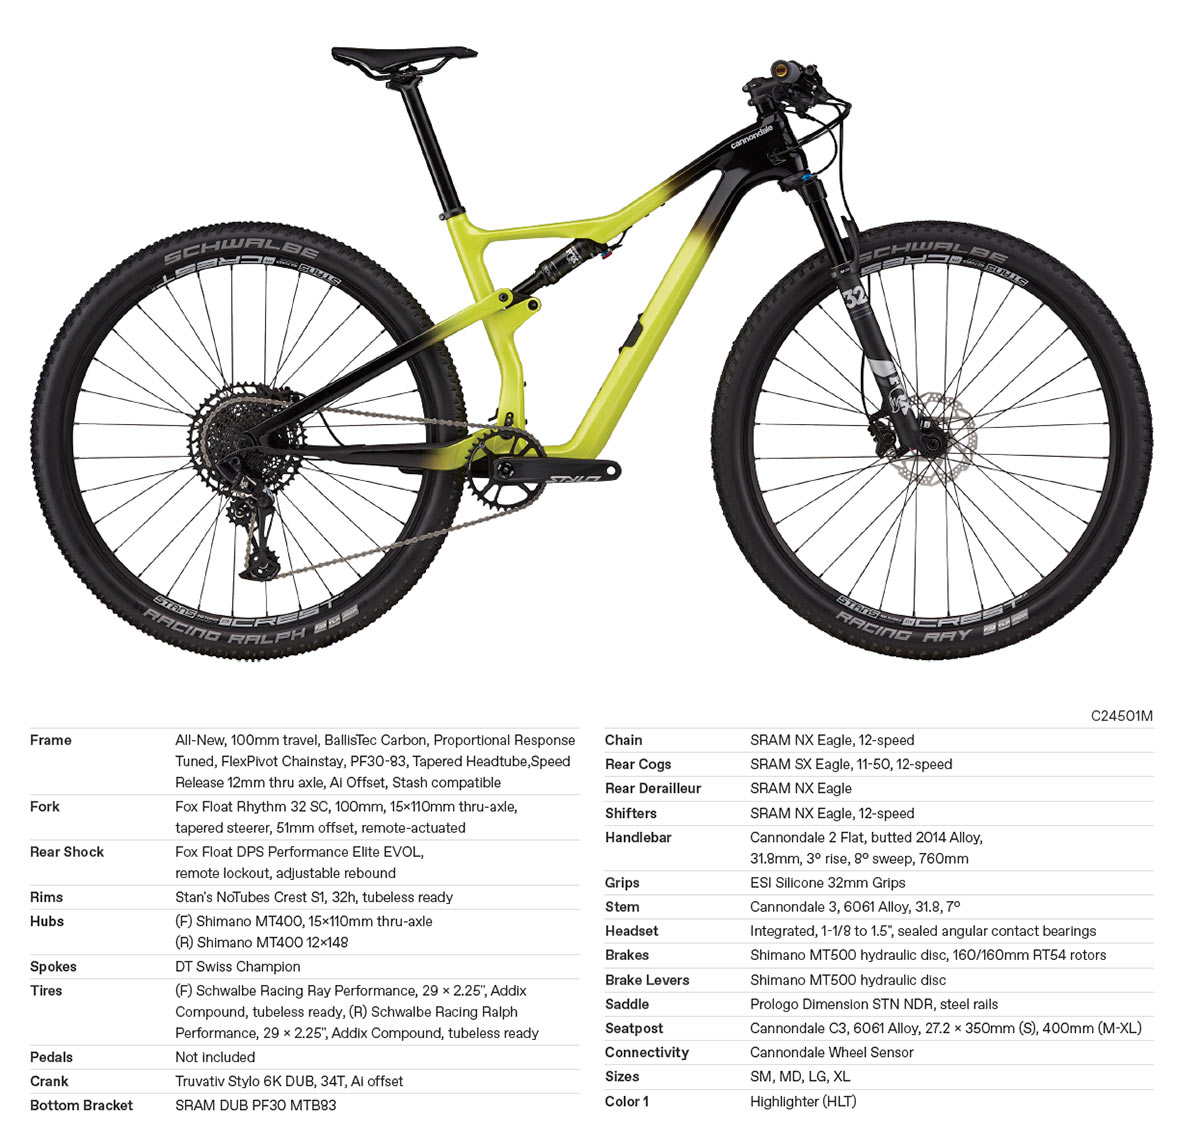 2021 Cannondale Scalpel Carbon 4 mountain bike specs and build components